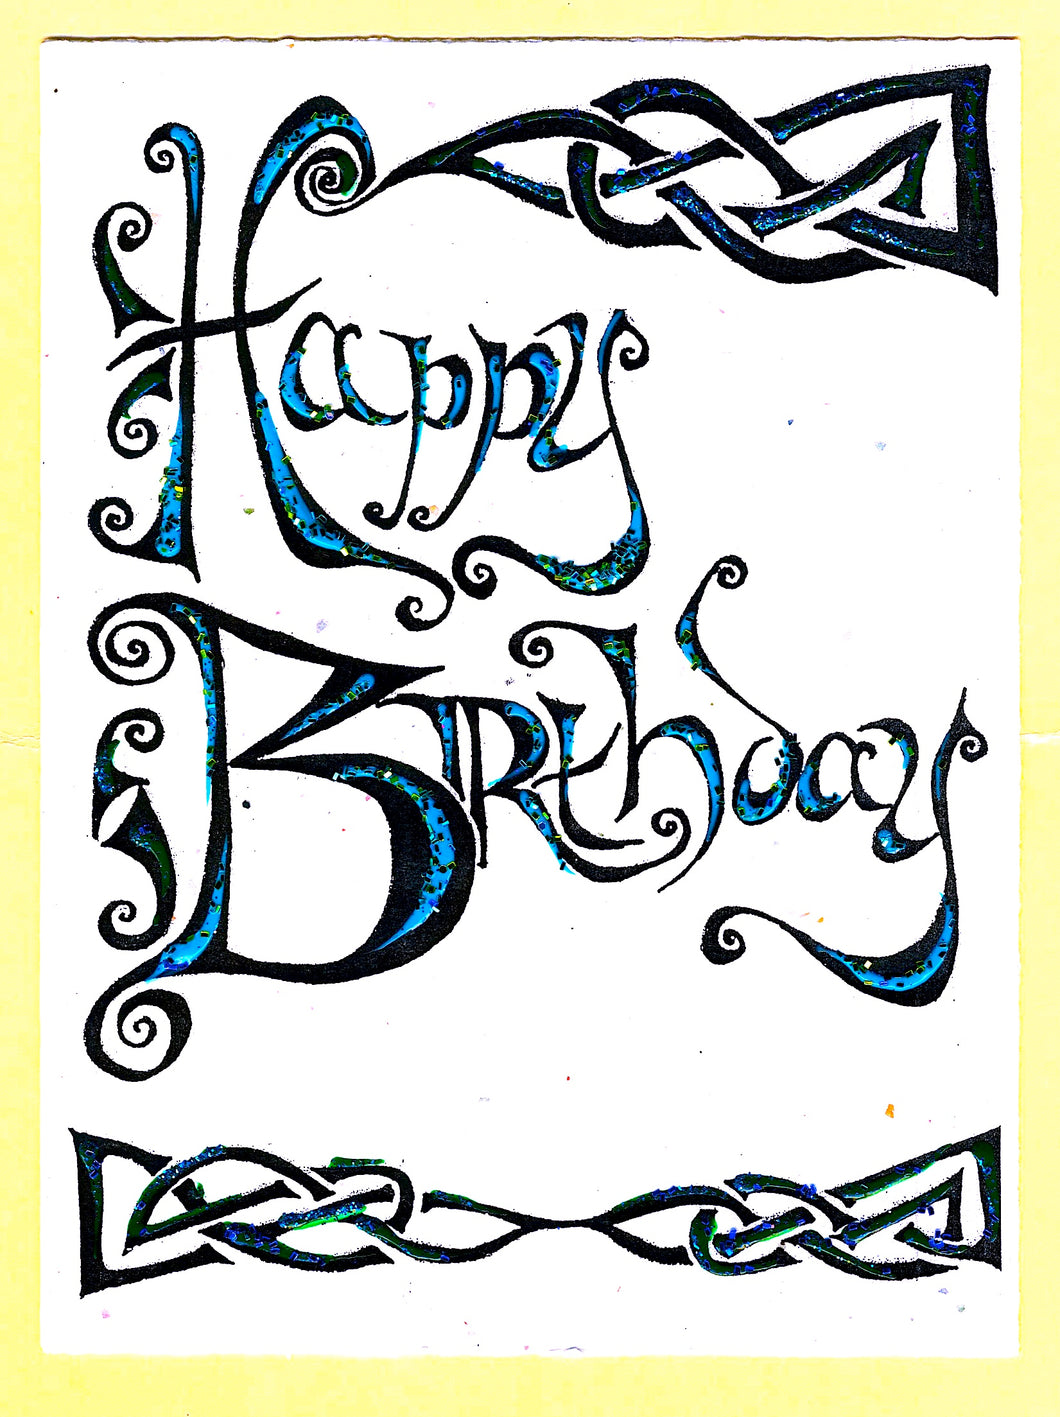 Oppenheimer - Assorted Handmade Birthday Cards, 4 Pack Colors Vary As Each Card Is Hand Colored/Decorated